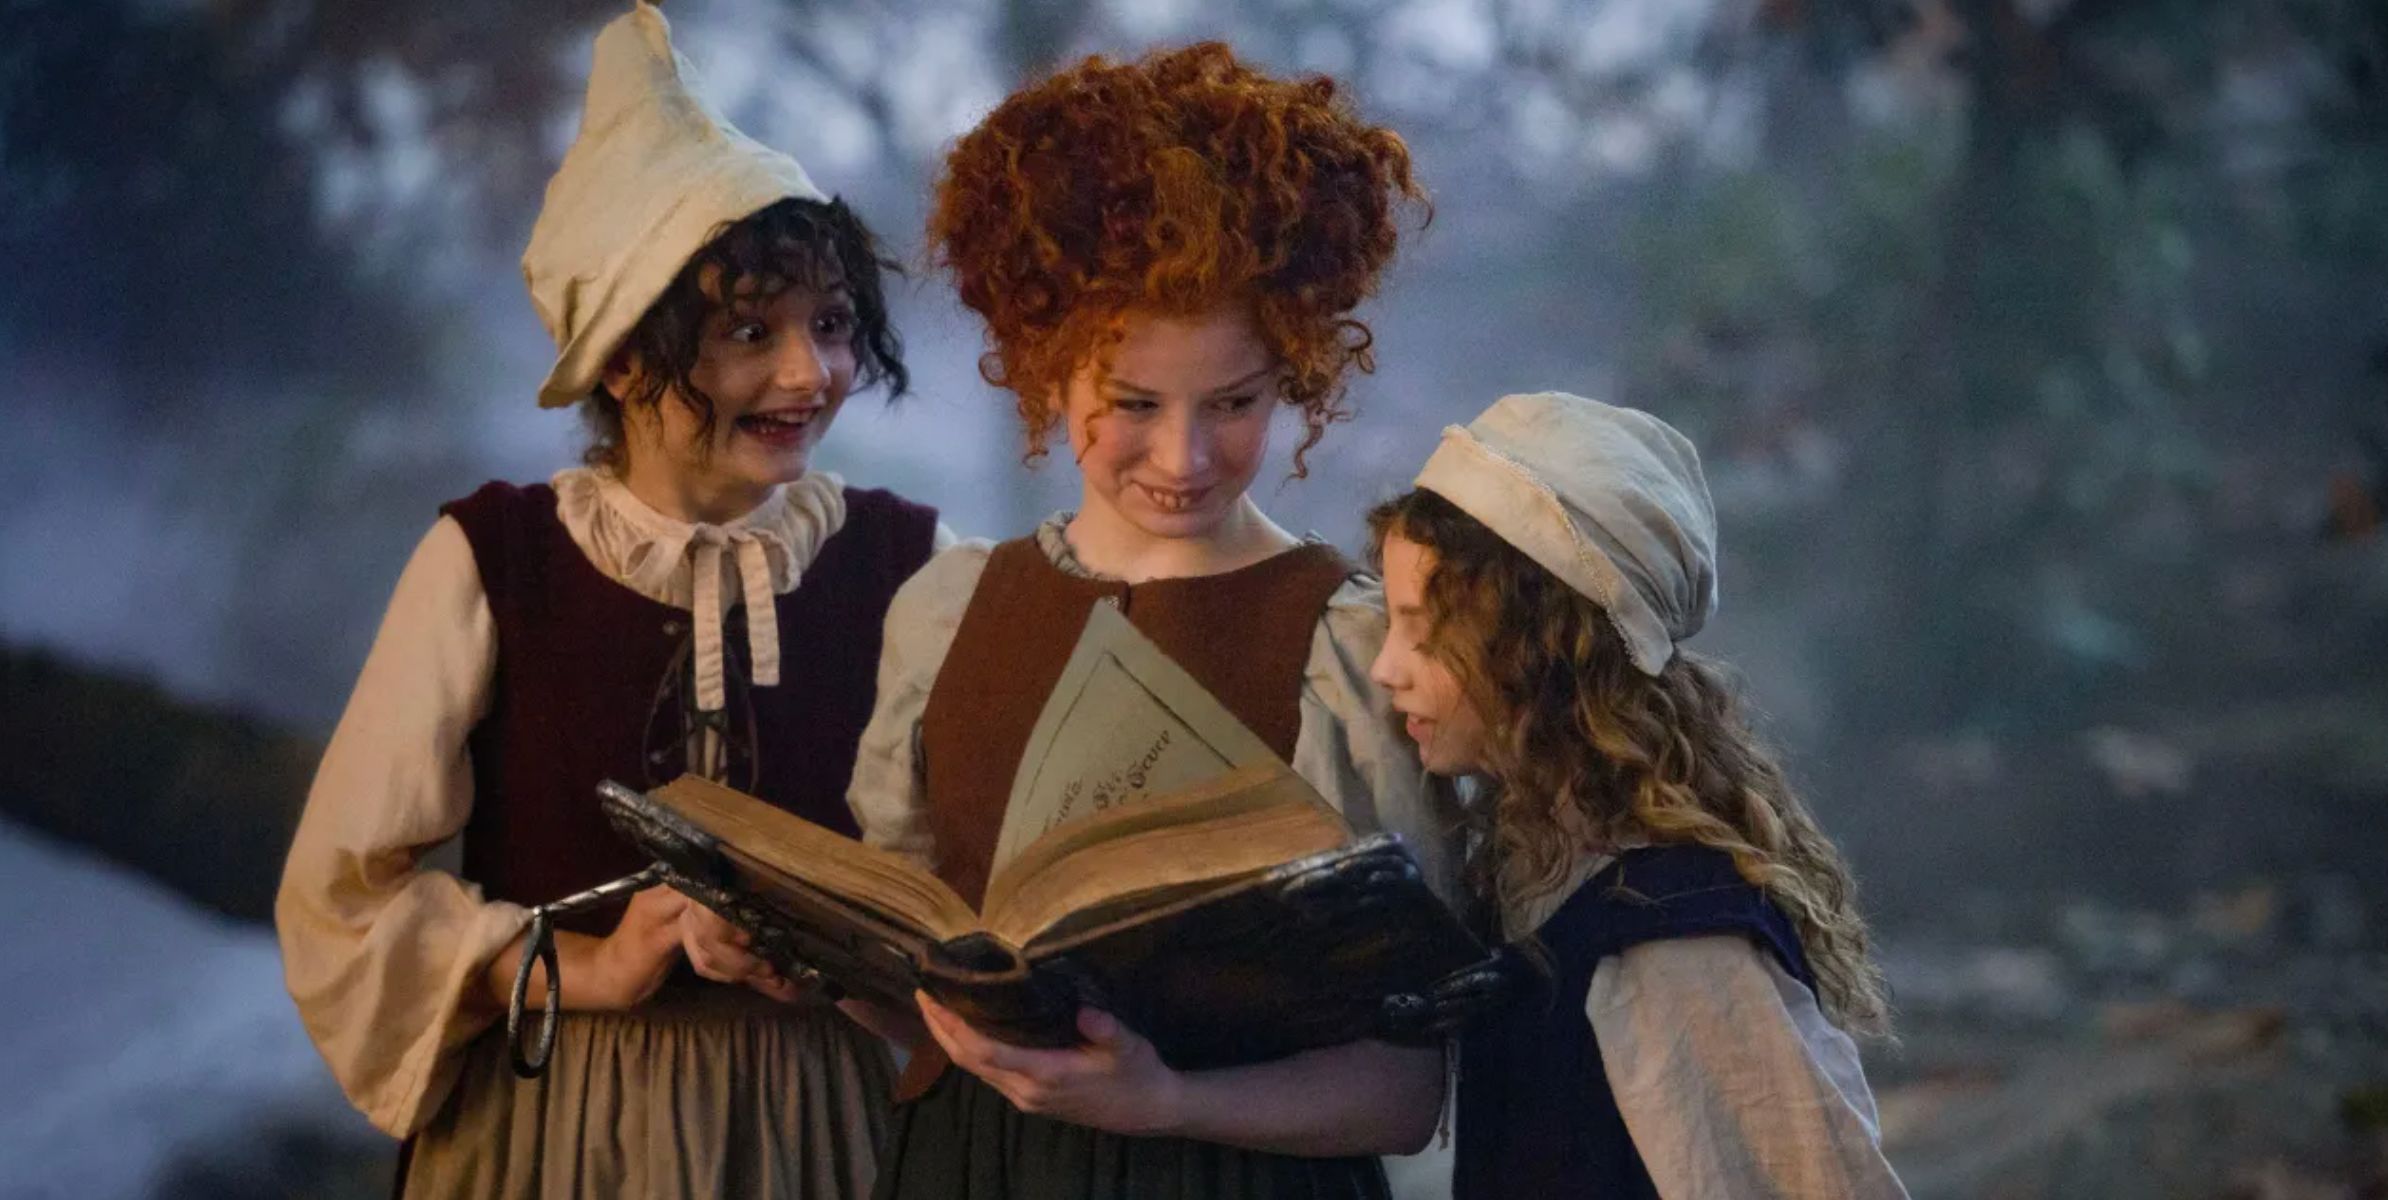 The young Sanderson sisters look through the spellbook in Hocus Pocus 2